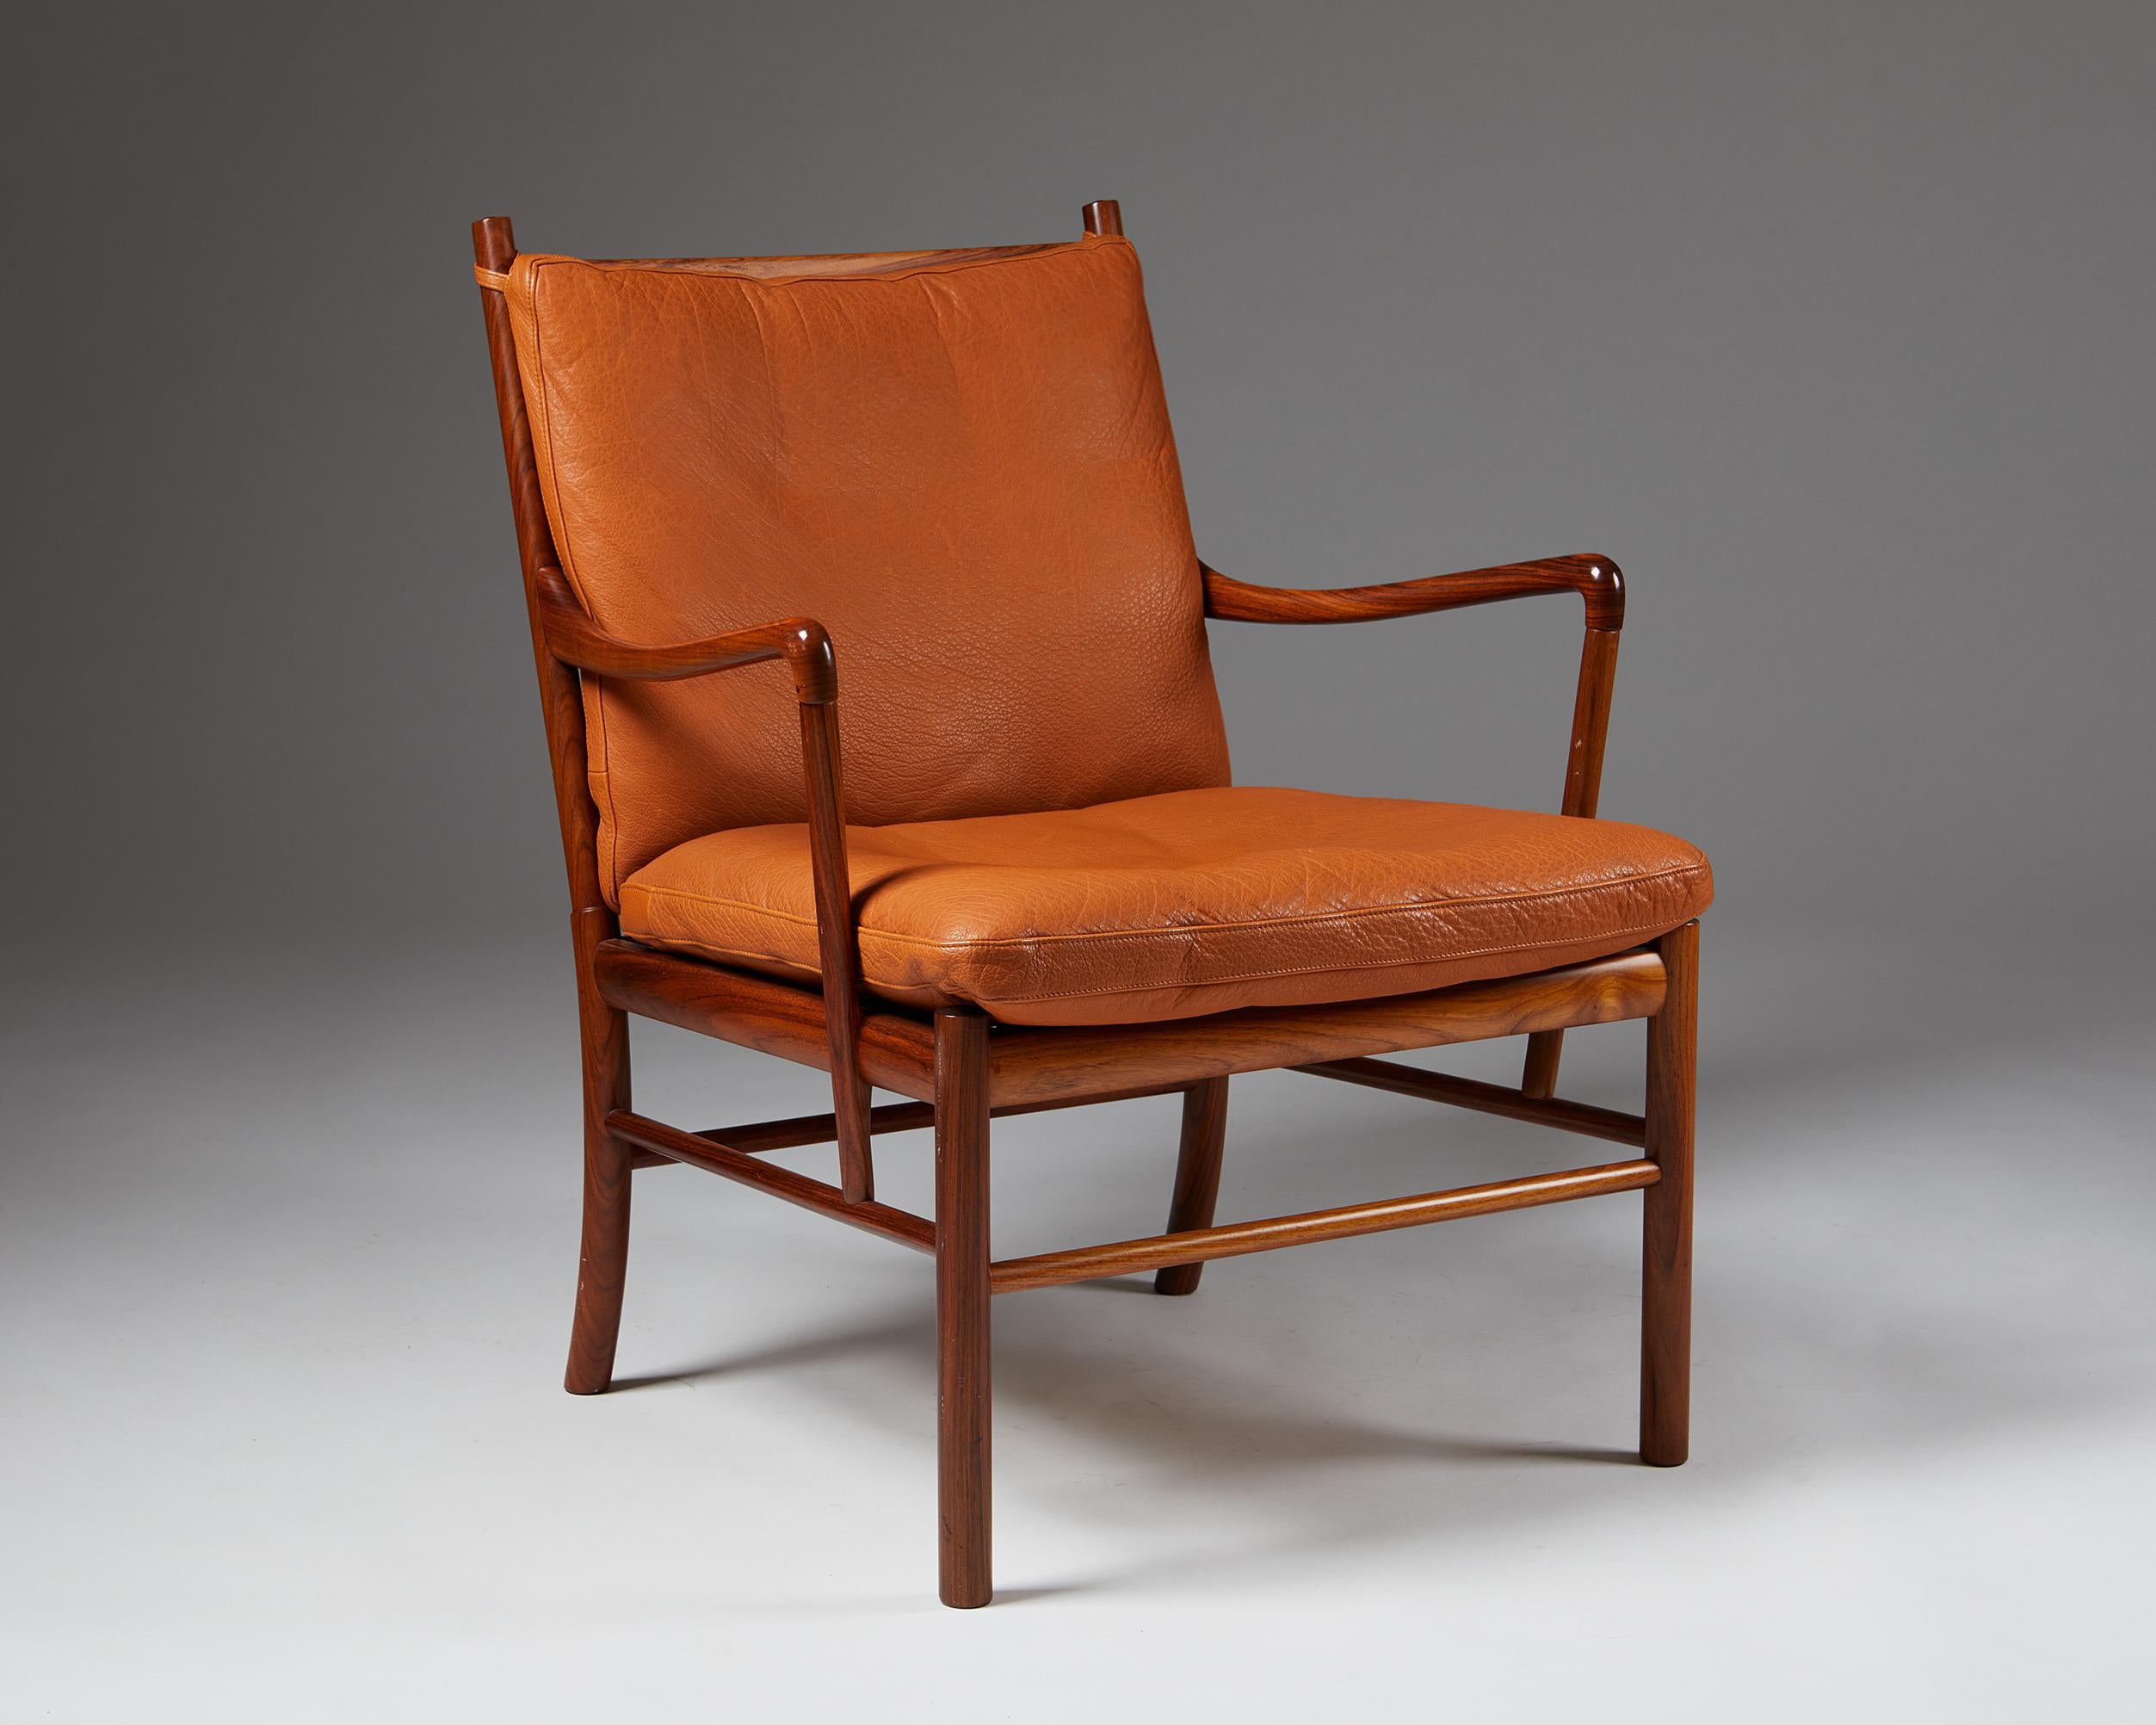 Colonial chair designed by Ole Wanscher, Manufactured by P Jeppesen,
Denmark. 1949.

Rosewood frame and tan leather cushions.

Measurements:
H: 85 cm / 2' 8 3/4